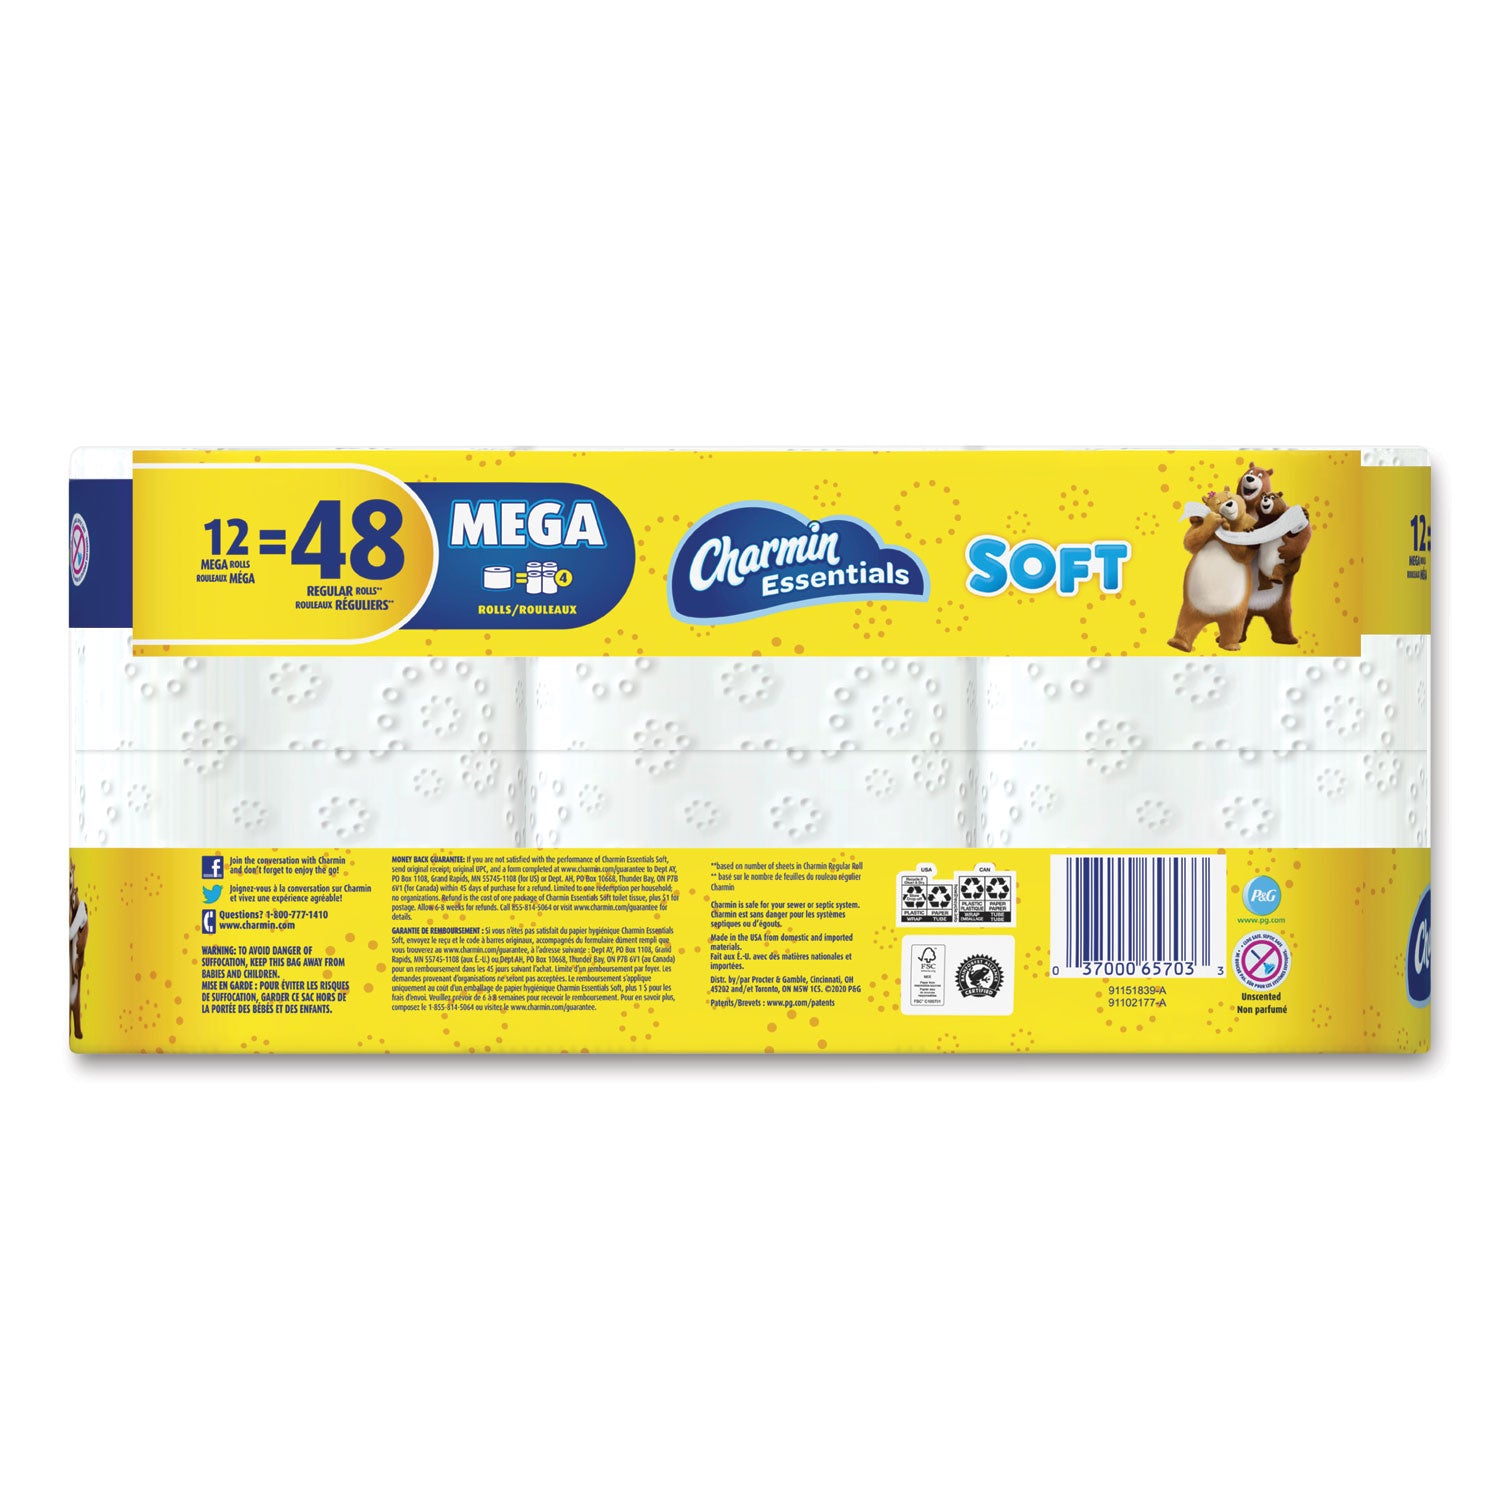 essentials-soft-bathroom-tissue-septic-safe-2-ply-white-352-sheets-roll-12-pack_pgc03159 - 2